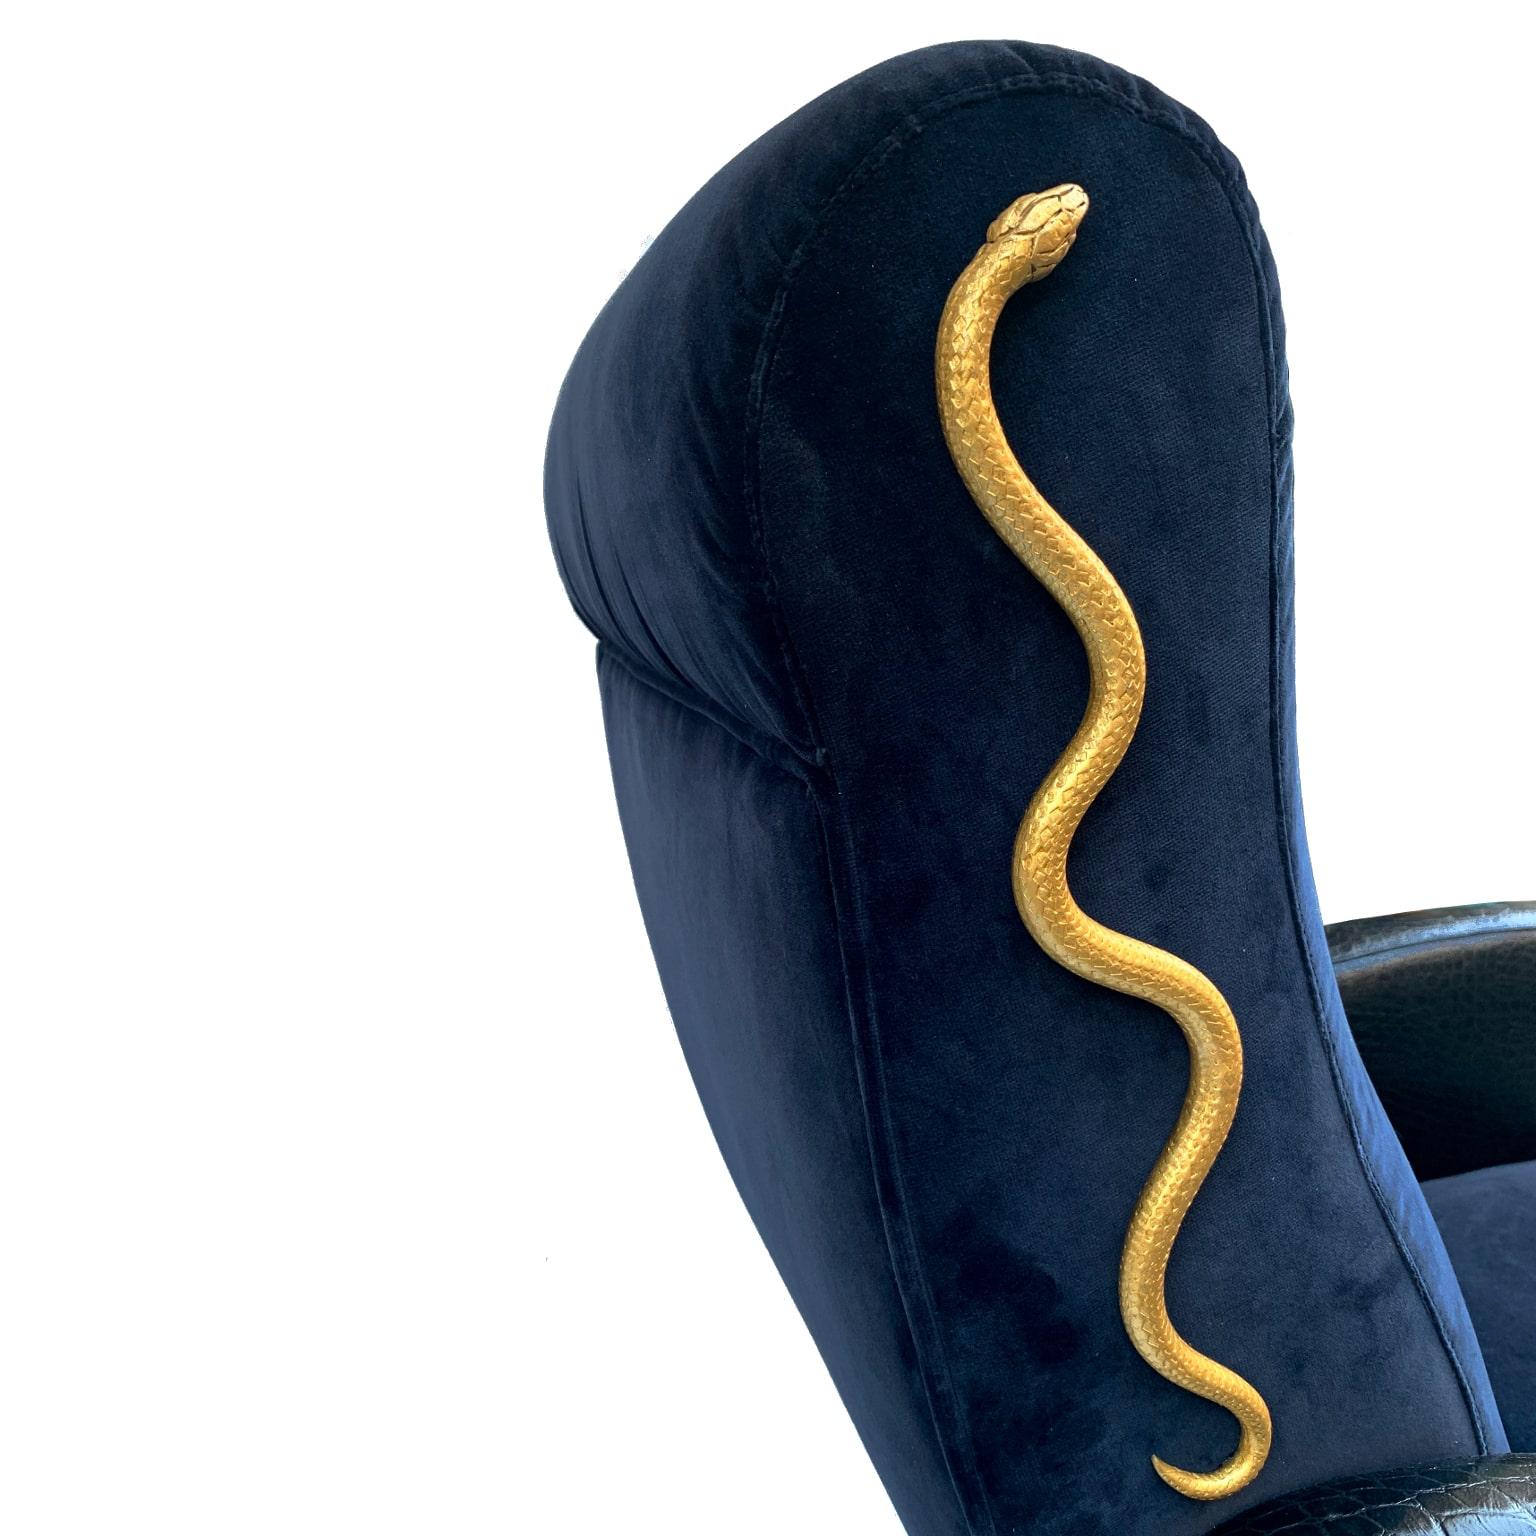 Modern 21st Century Contemporary Dark Blue Armchair with Golden Snakes Sculptures For Sale